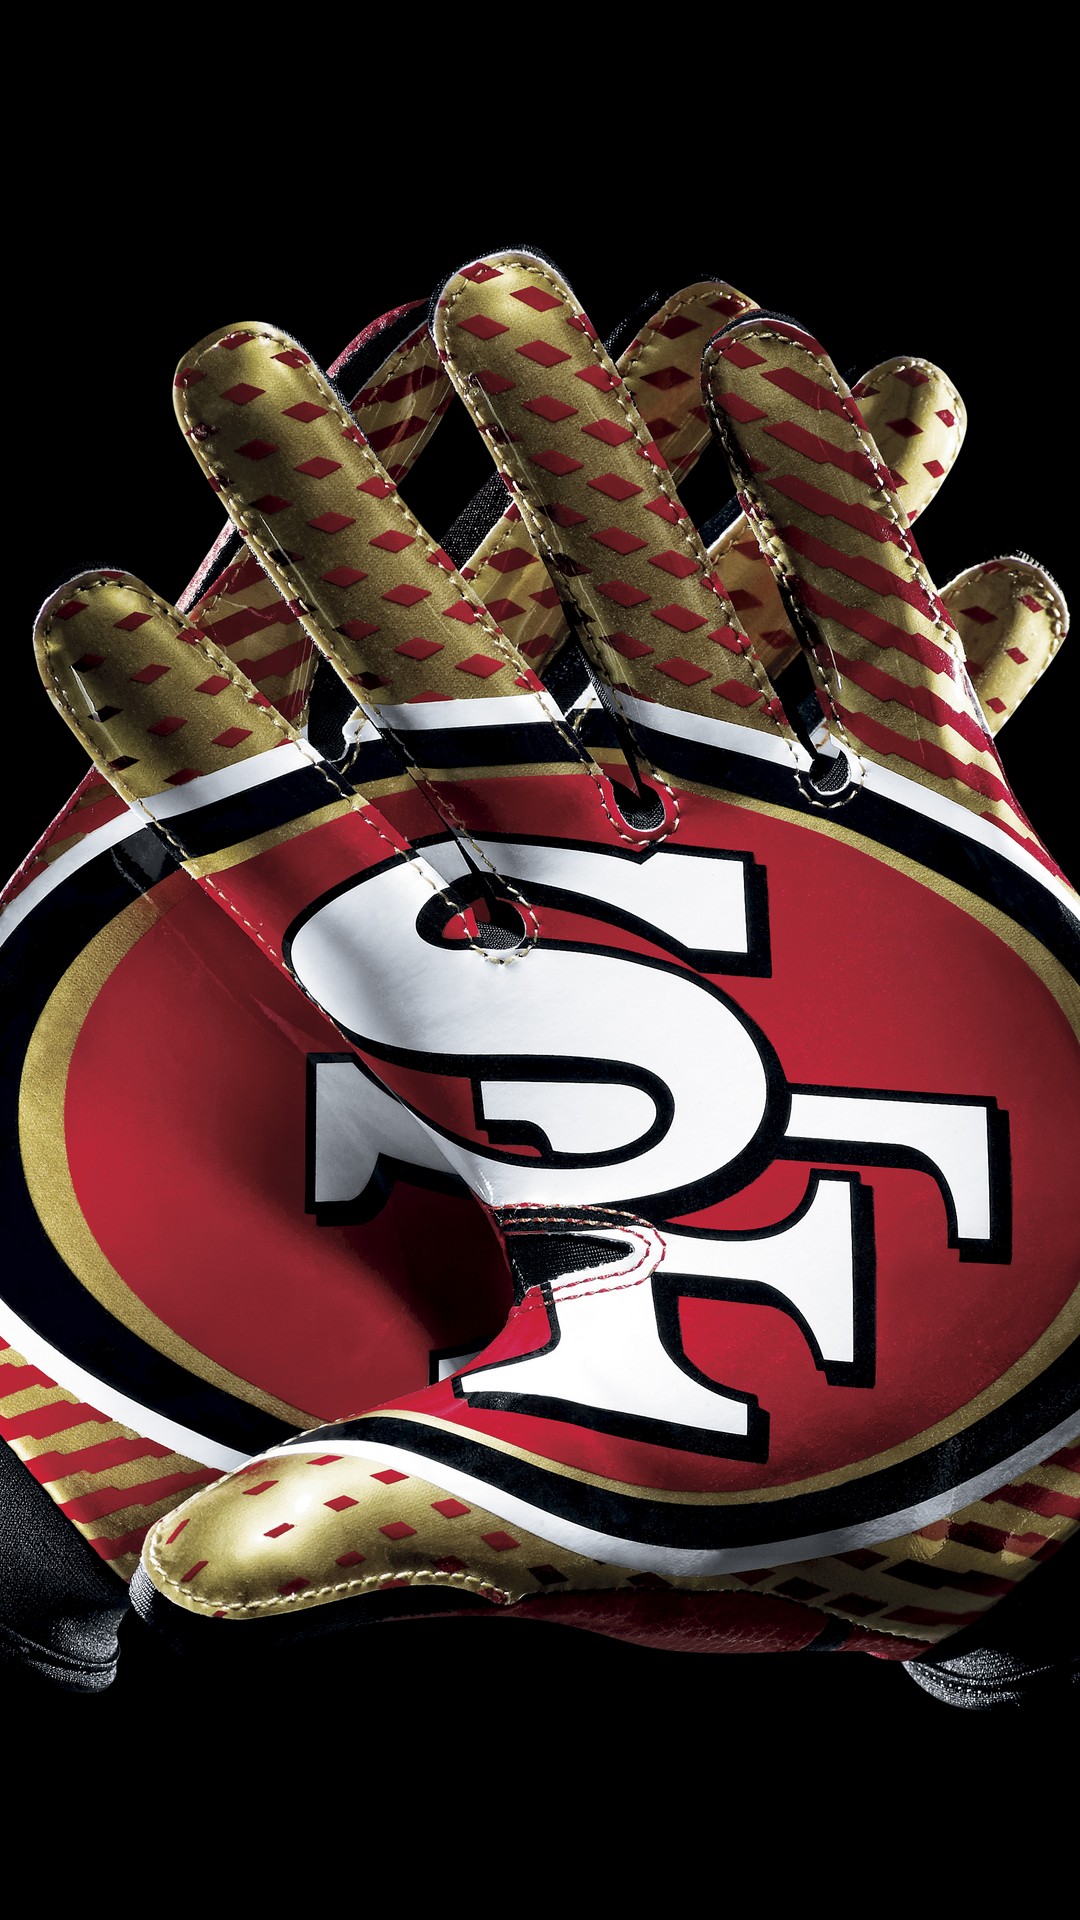 San Francisco 49ers iPhone Wallpaper High Quality With high-resolution 1080X1920 pixel. Donwload and set as wallpaper for your iPhone X, iPhone XS home screen backgrounds, XS Max, XR, iPhone8 lock screen wallpaper, iPhone 7, 6, SE, and other mobile devices